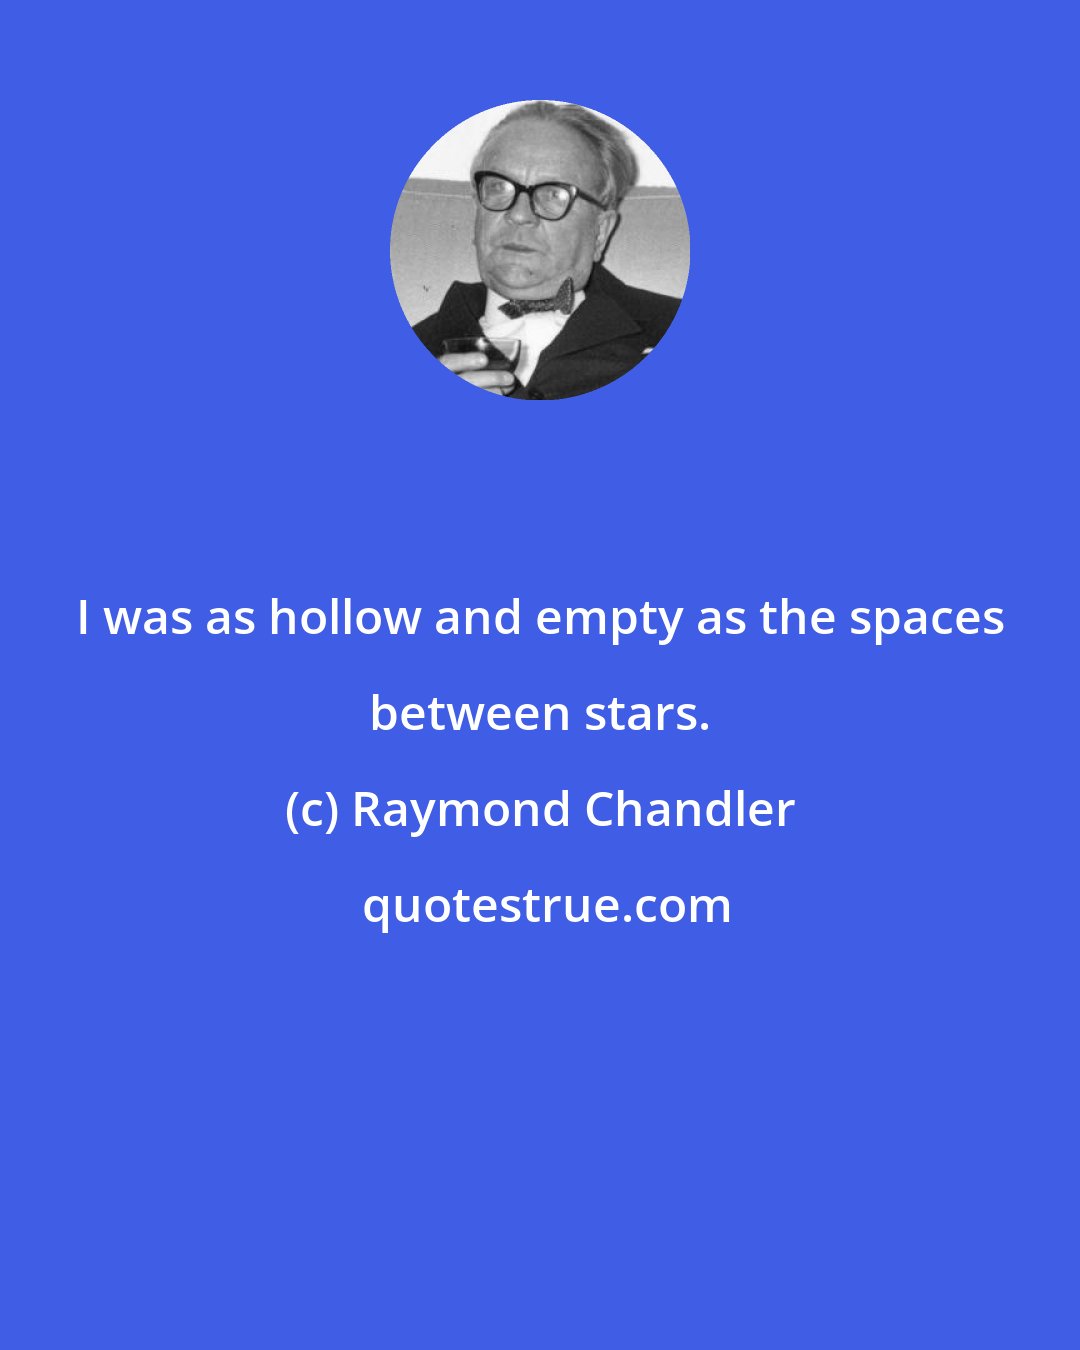 Raymond Chandler: I was as hollow and empty as the spaces between stars.